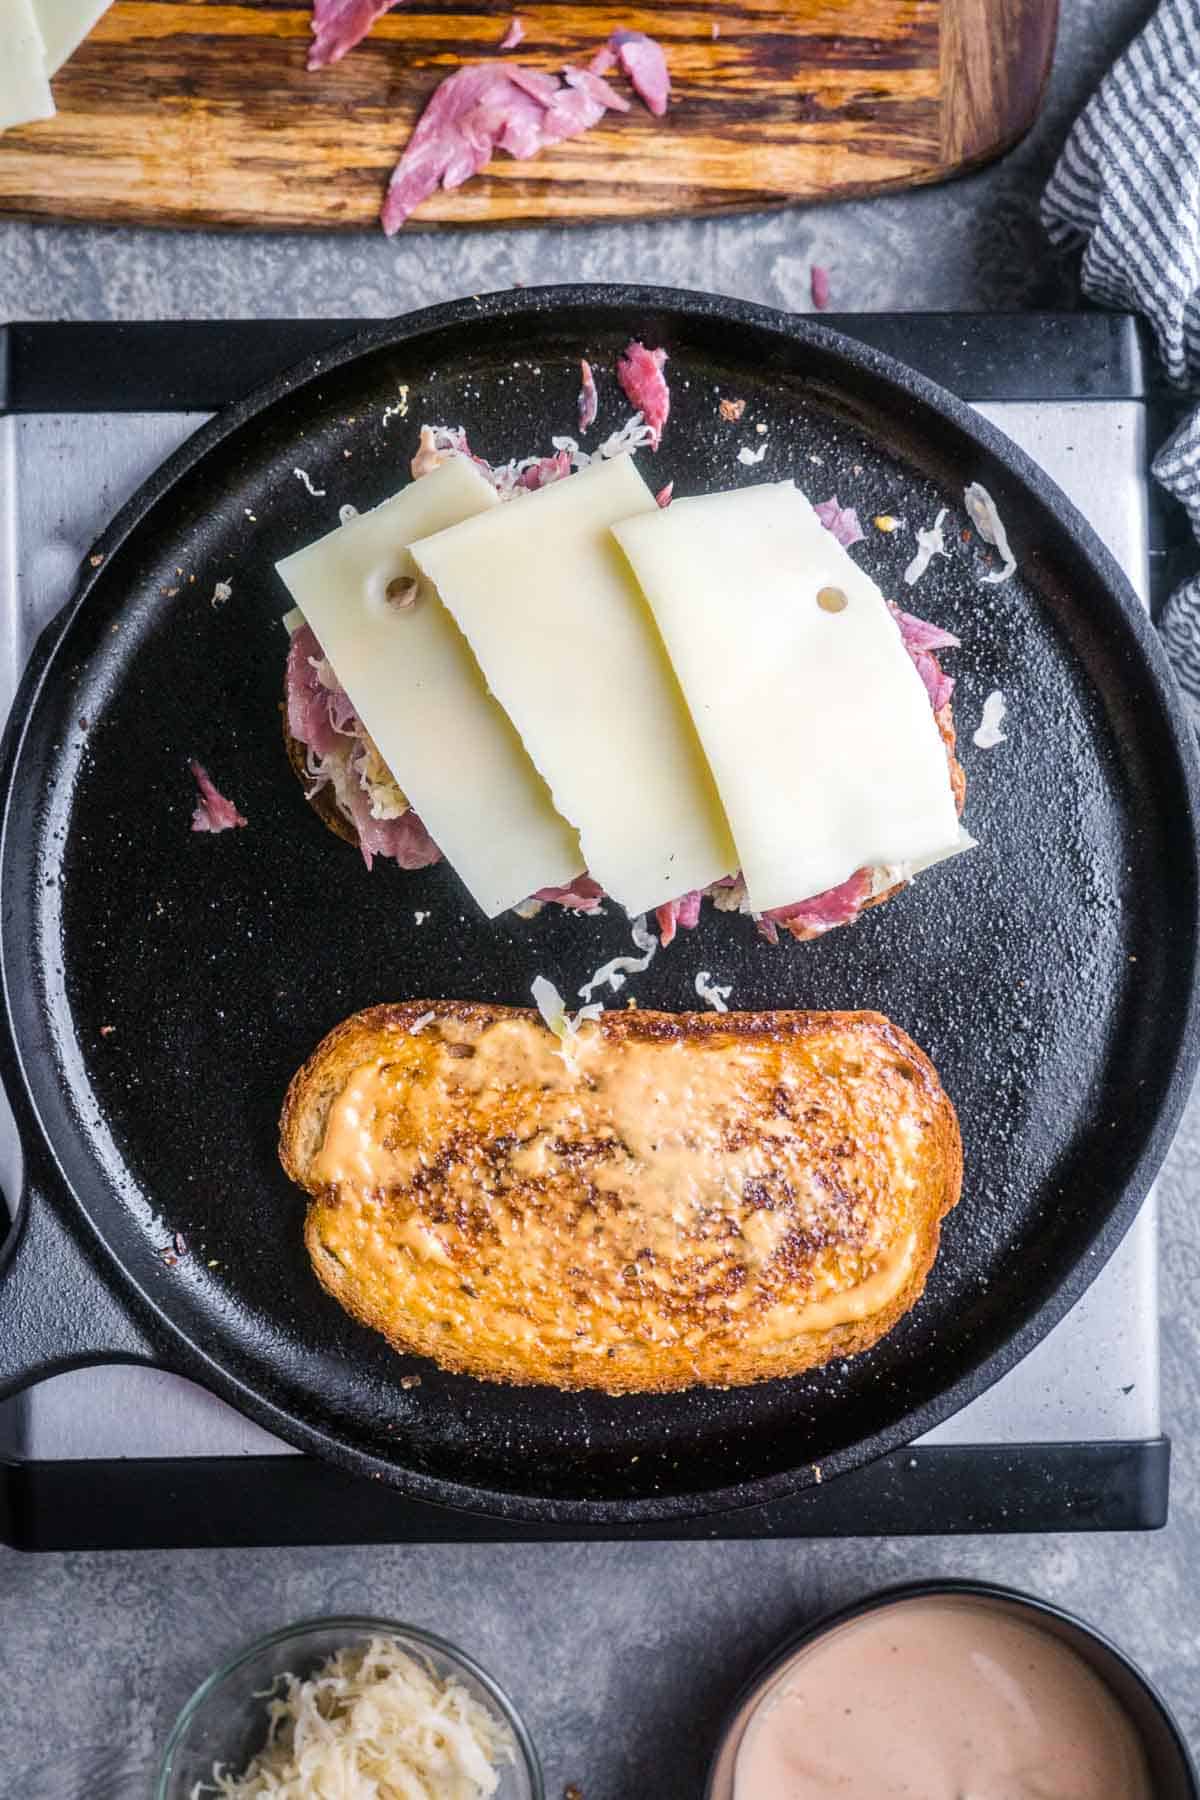 Overhead view of two Reubens in a cast iron skillet, one opened to show sliced cheese